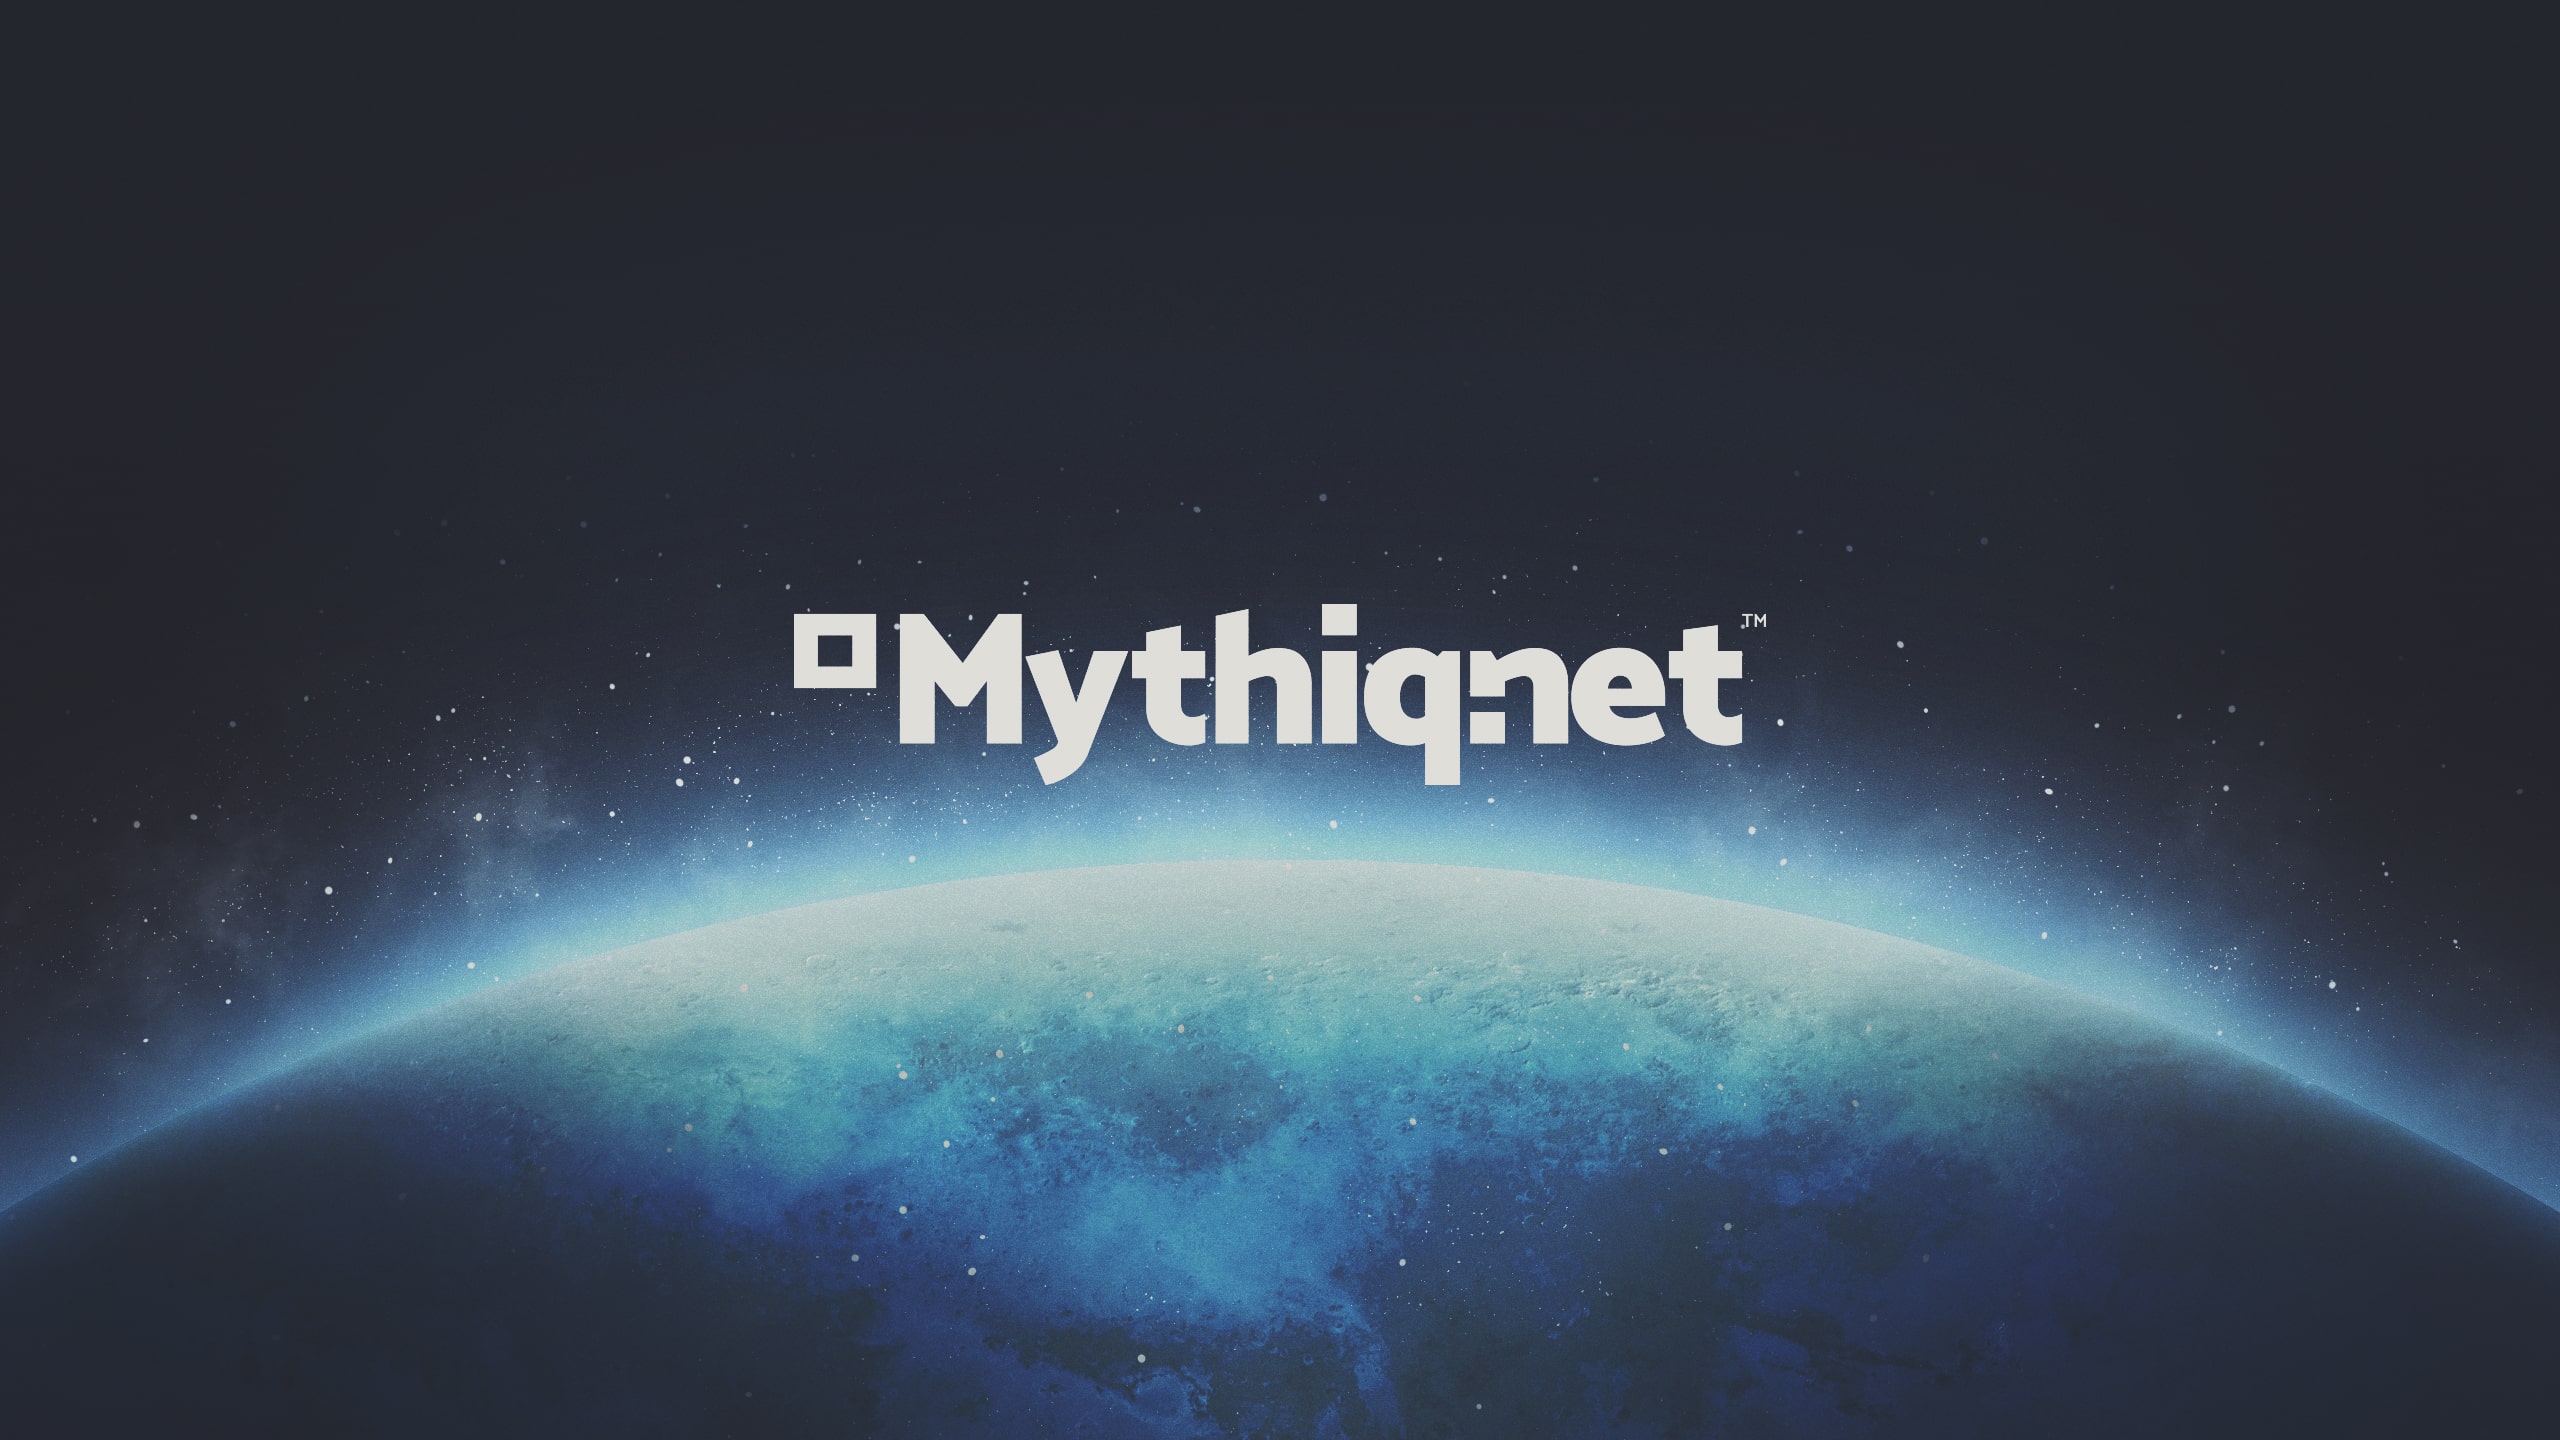 Welcome to the new era of Mythiq.net!